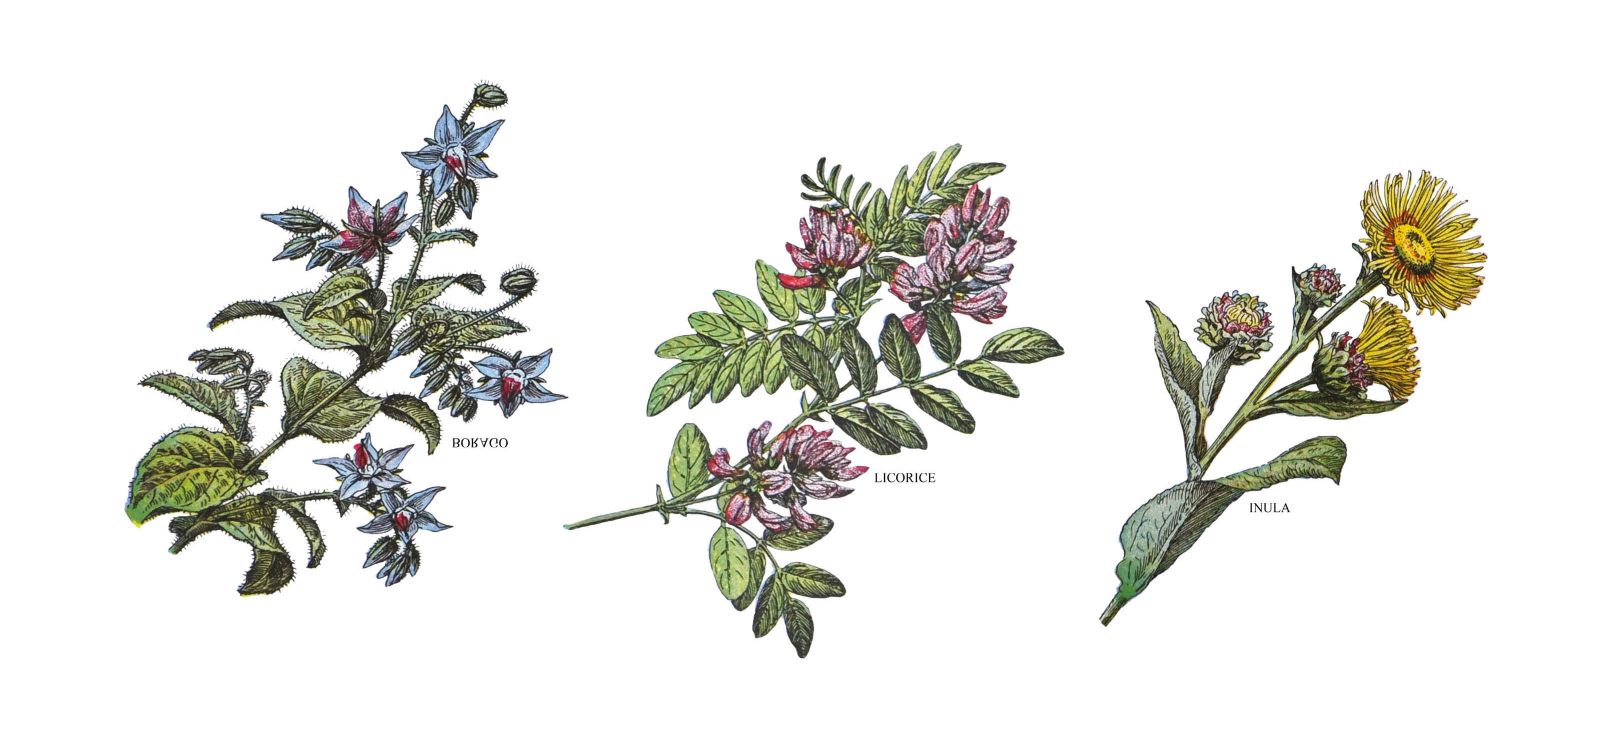 Line drawings of borage, licorice, and inula branches, showing both leaves and flowers.